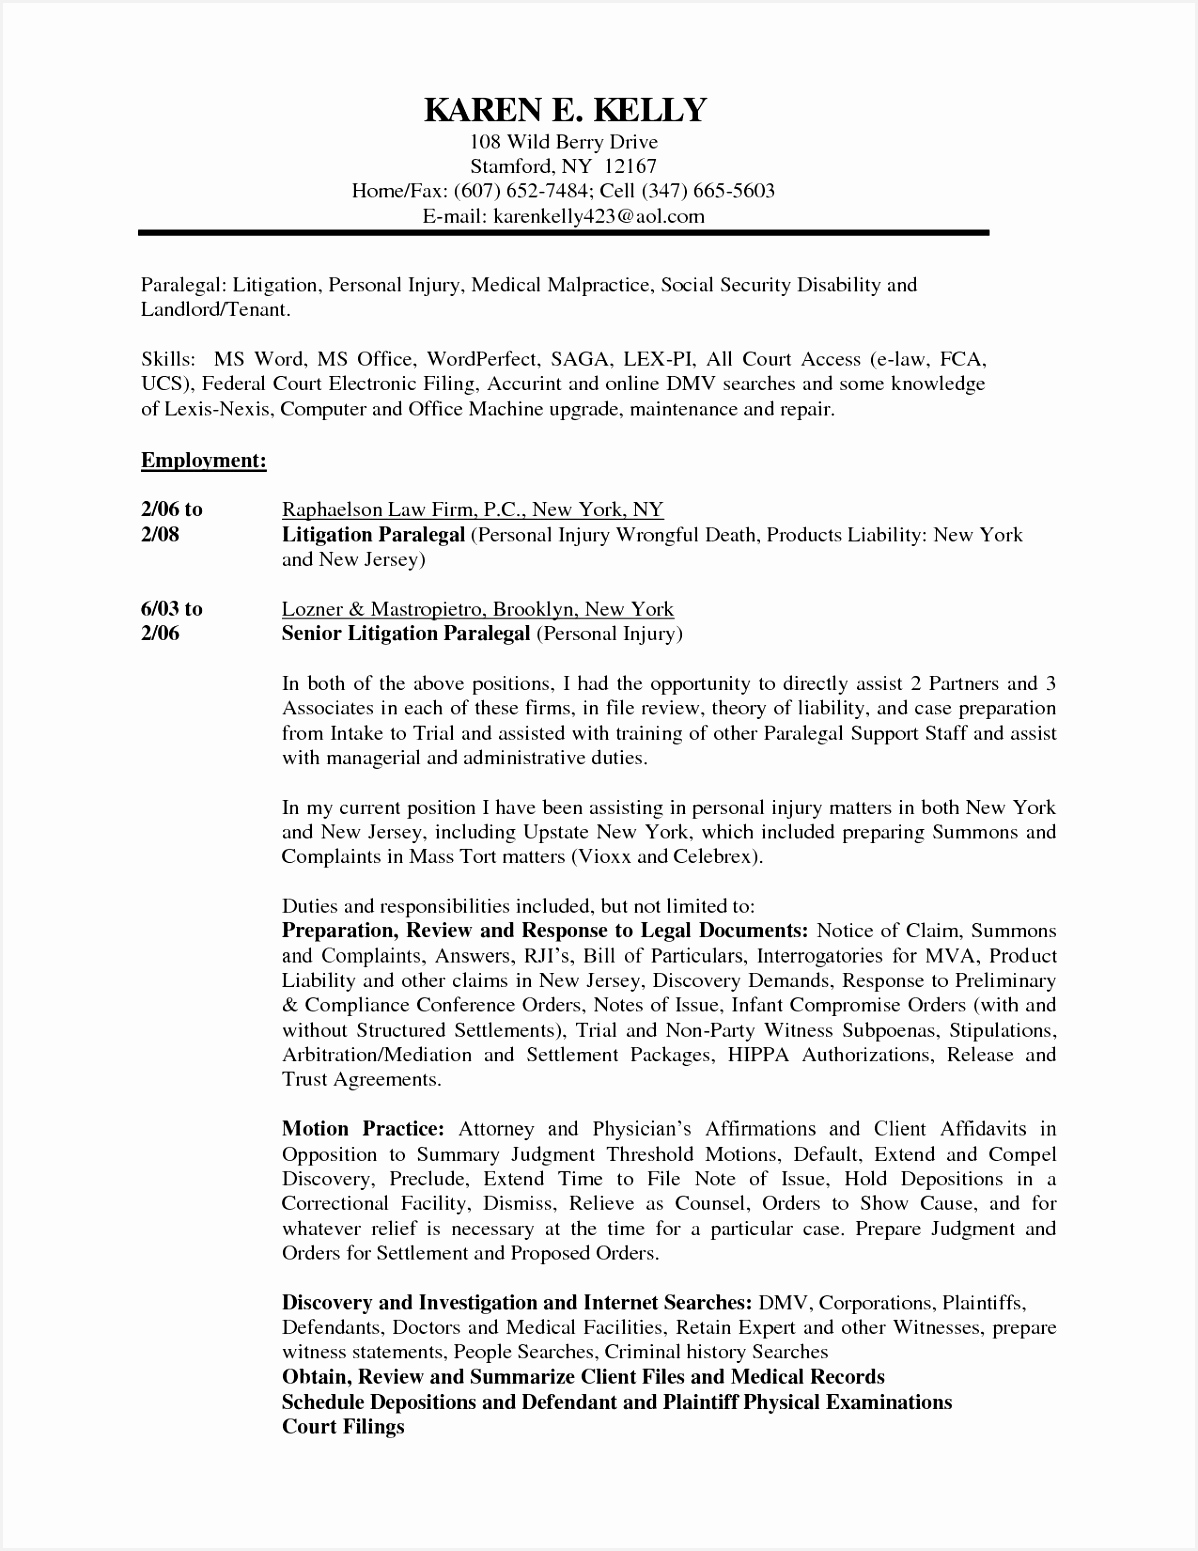 Personal Statement Resume Luxury Awesome Nanny Resume Example Unique Nanny Resume 0d atopetioa Personal Statement 15511198awhIx